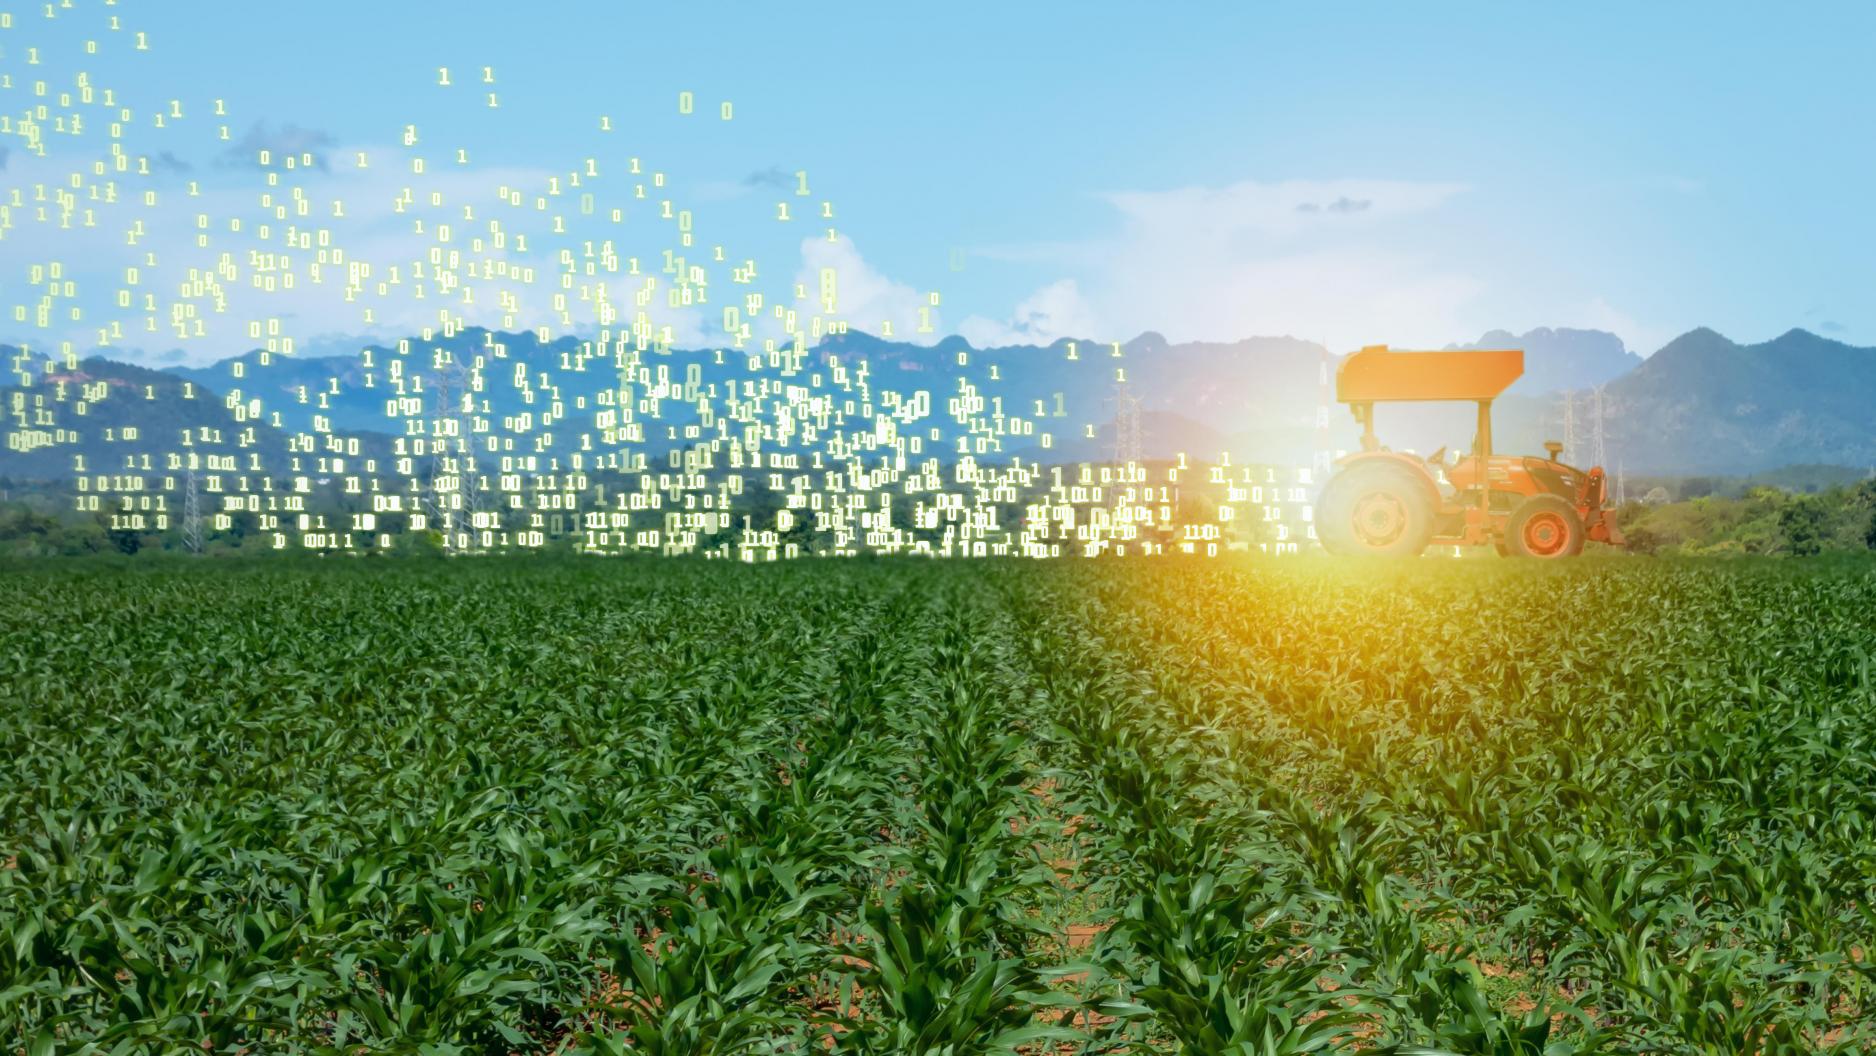 Newswise: Tandon Researcher Joins Major Collaboration Aimed at Using AI Models to Improve Agriculture